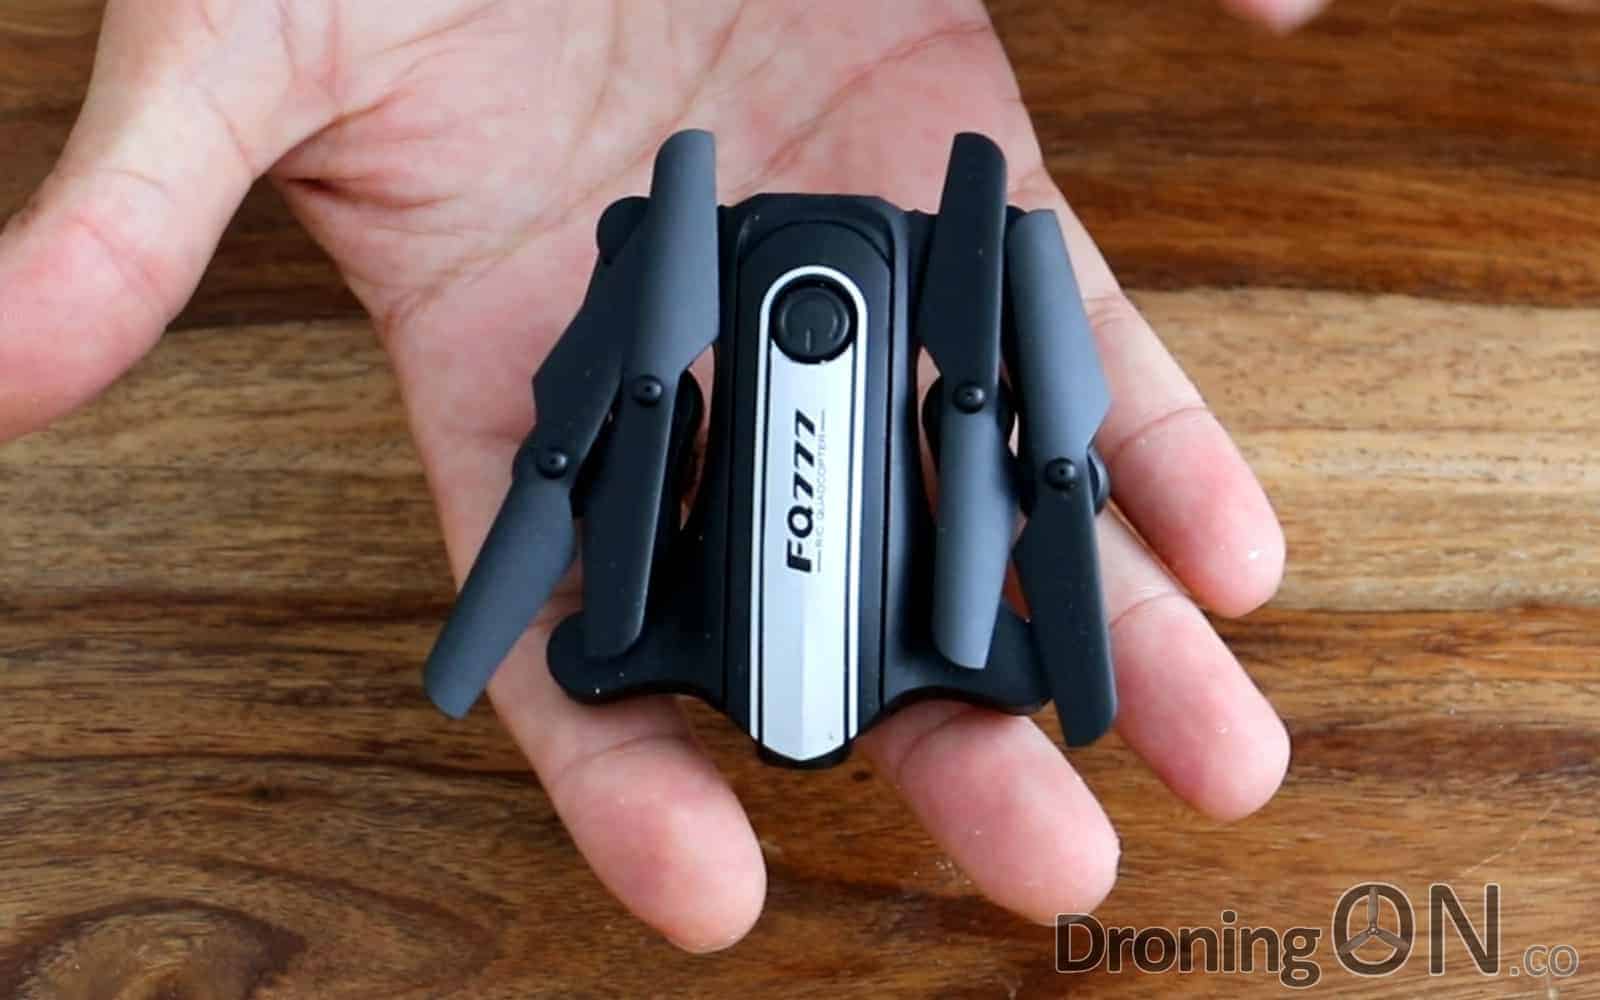 The FQ777 FQ31 is one of the worlds smallest folding video drones, this is a full unboxing, review and flight test.